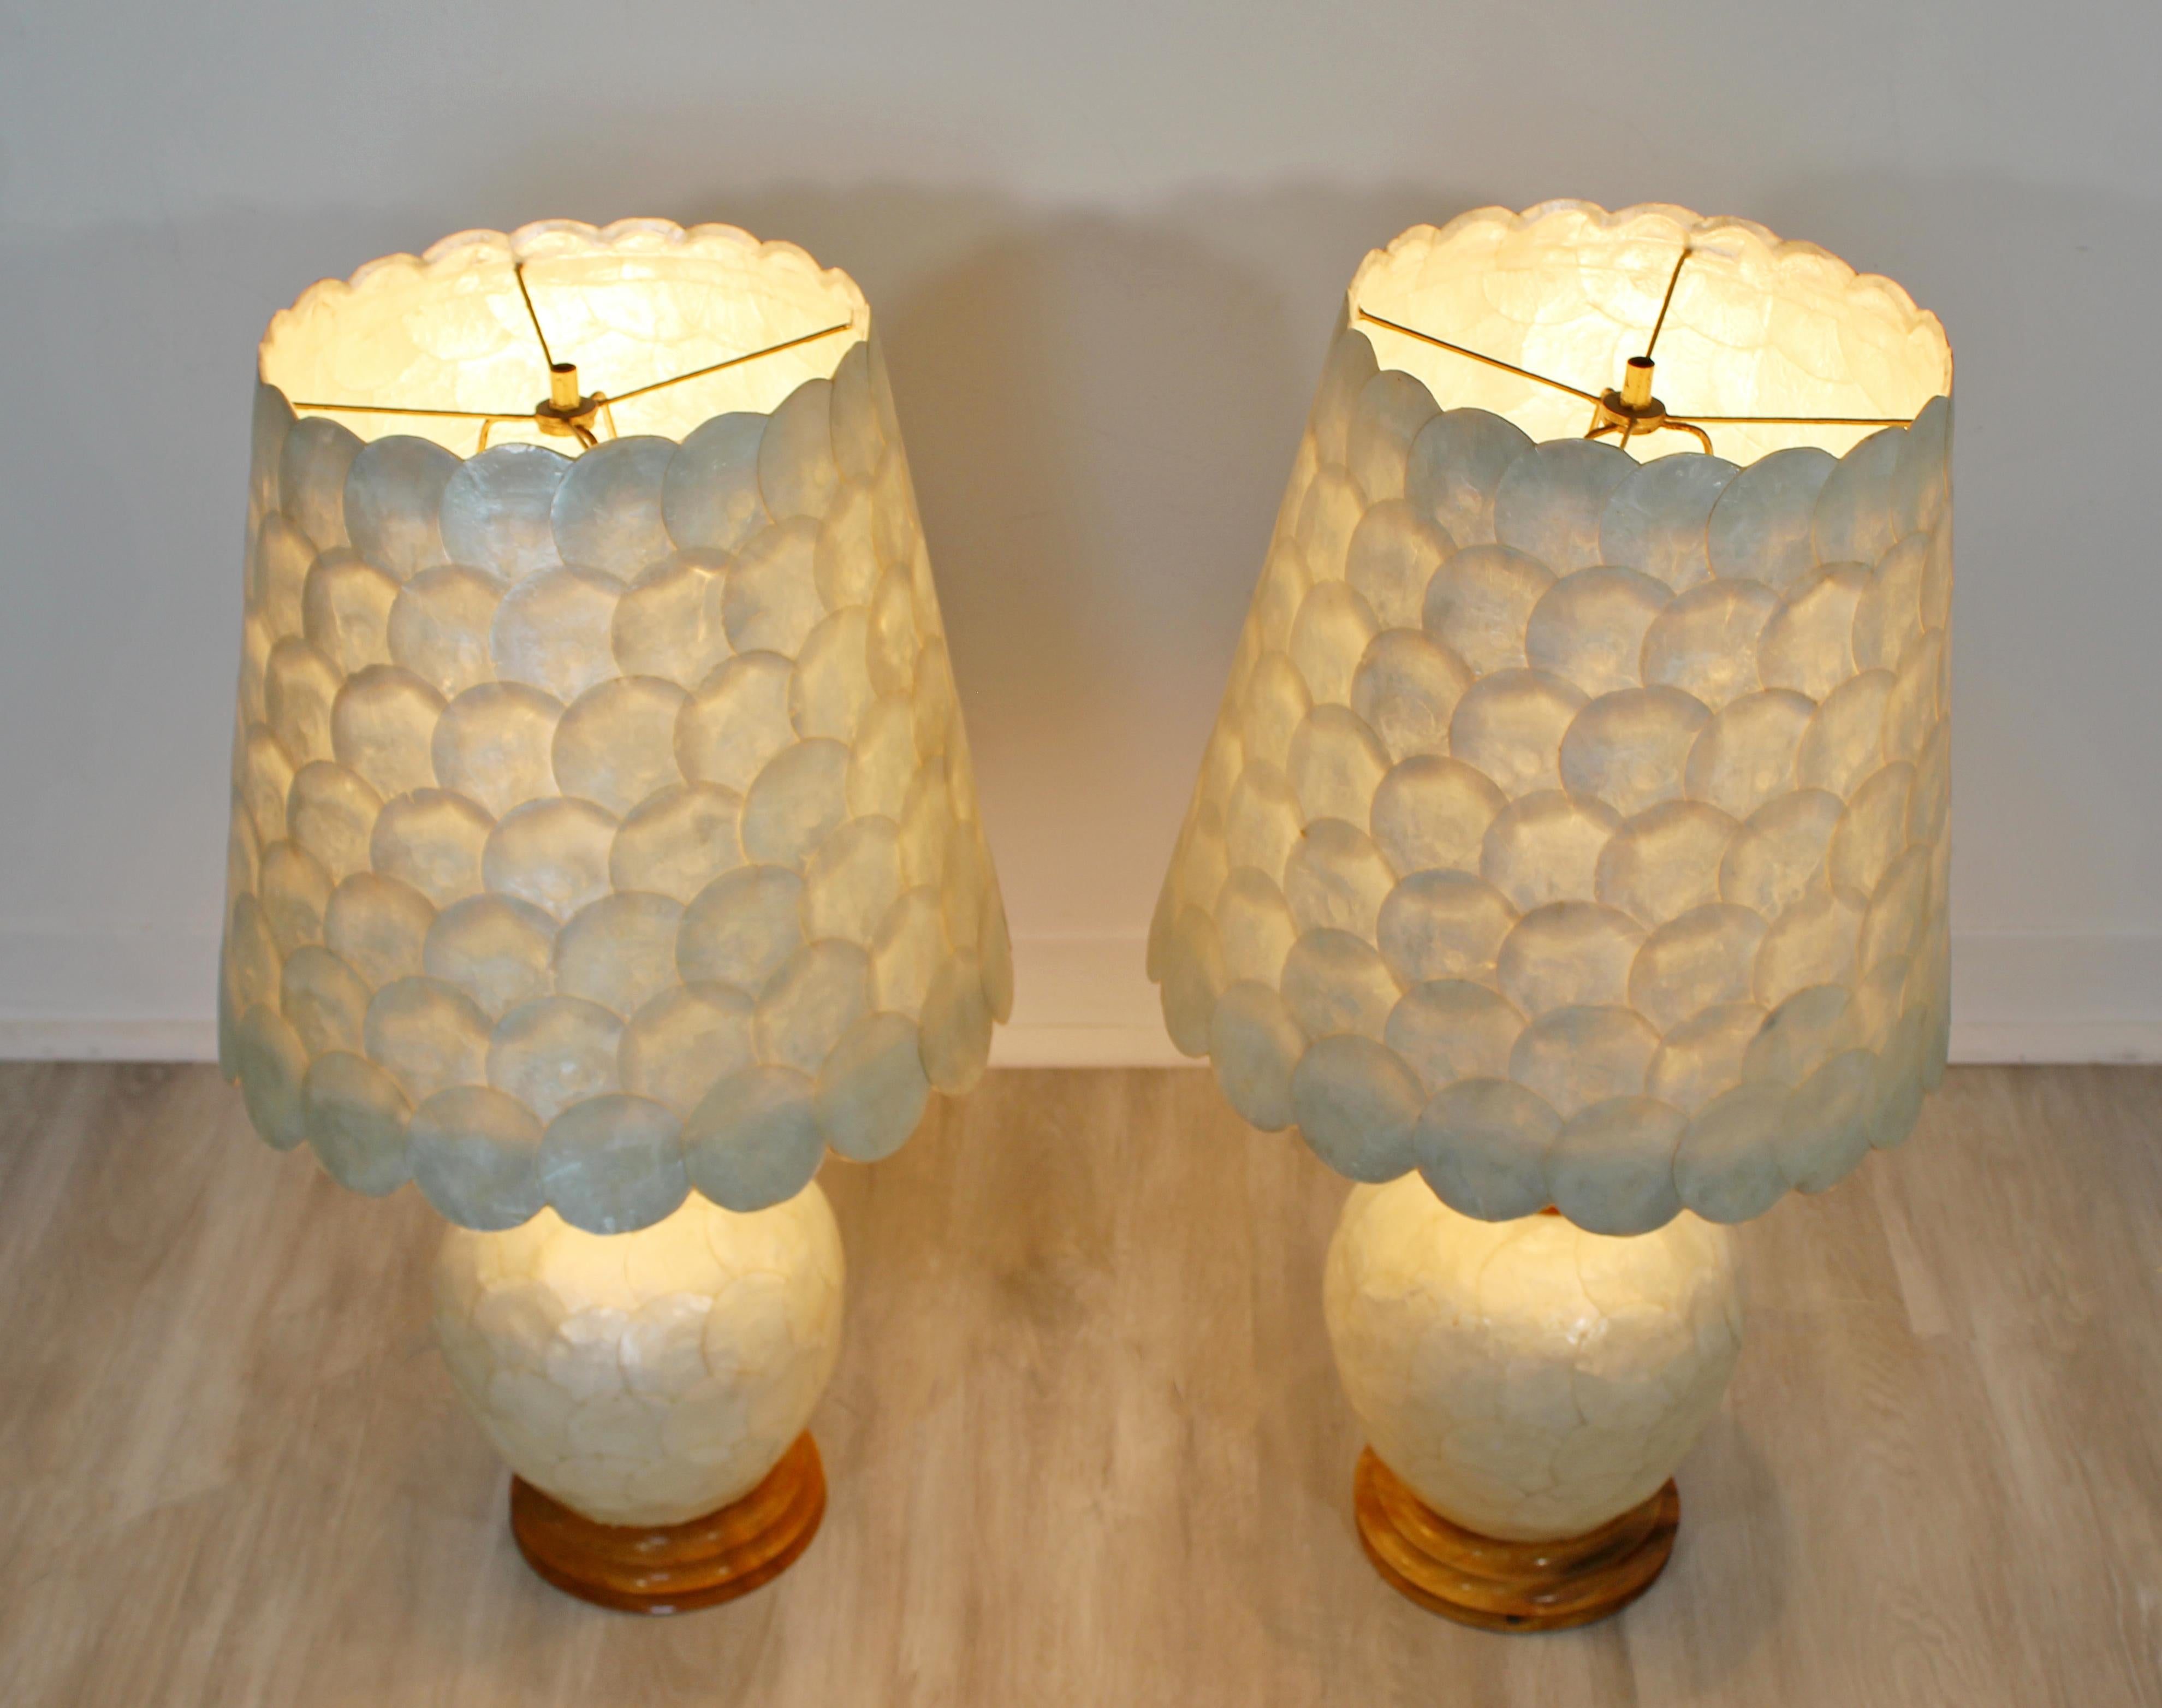 For your consideration is a shimmering pair of Capiz shell table lamps, with brass details and wood bases, circa 1970s. In excellent condition. The dimensions are 12